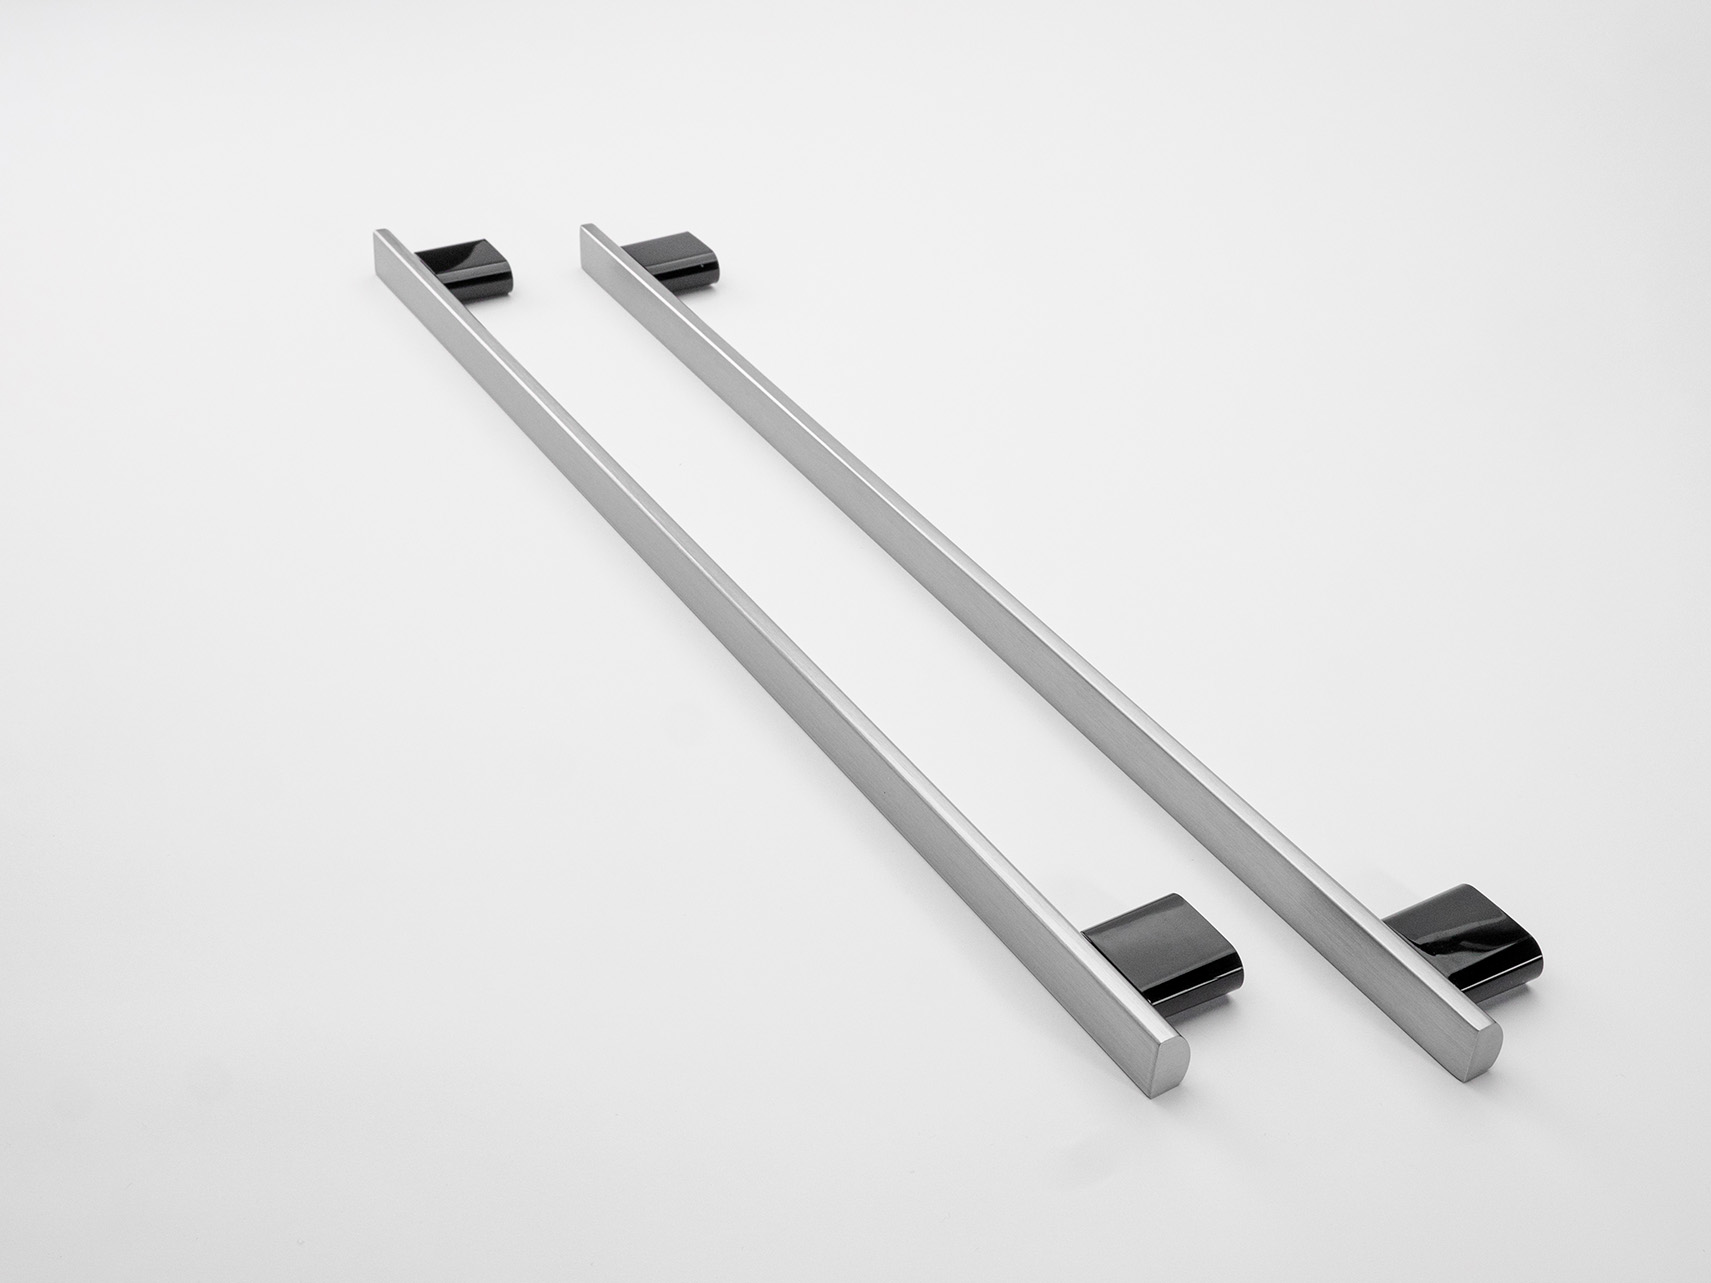 D-section handles - Brushed Anodized Stainless Steel with plastic spacers